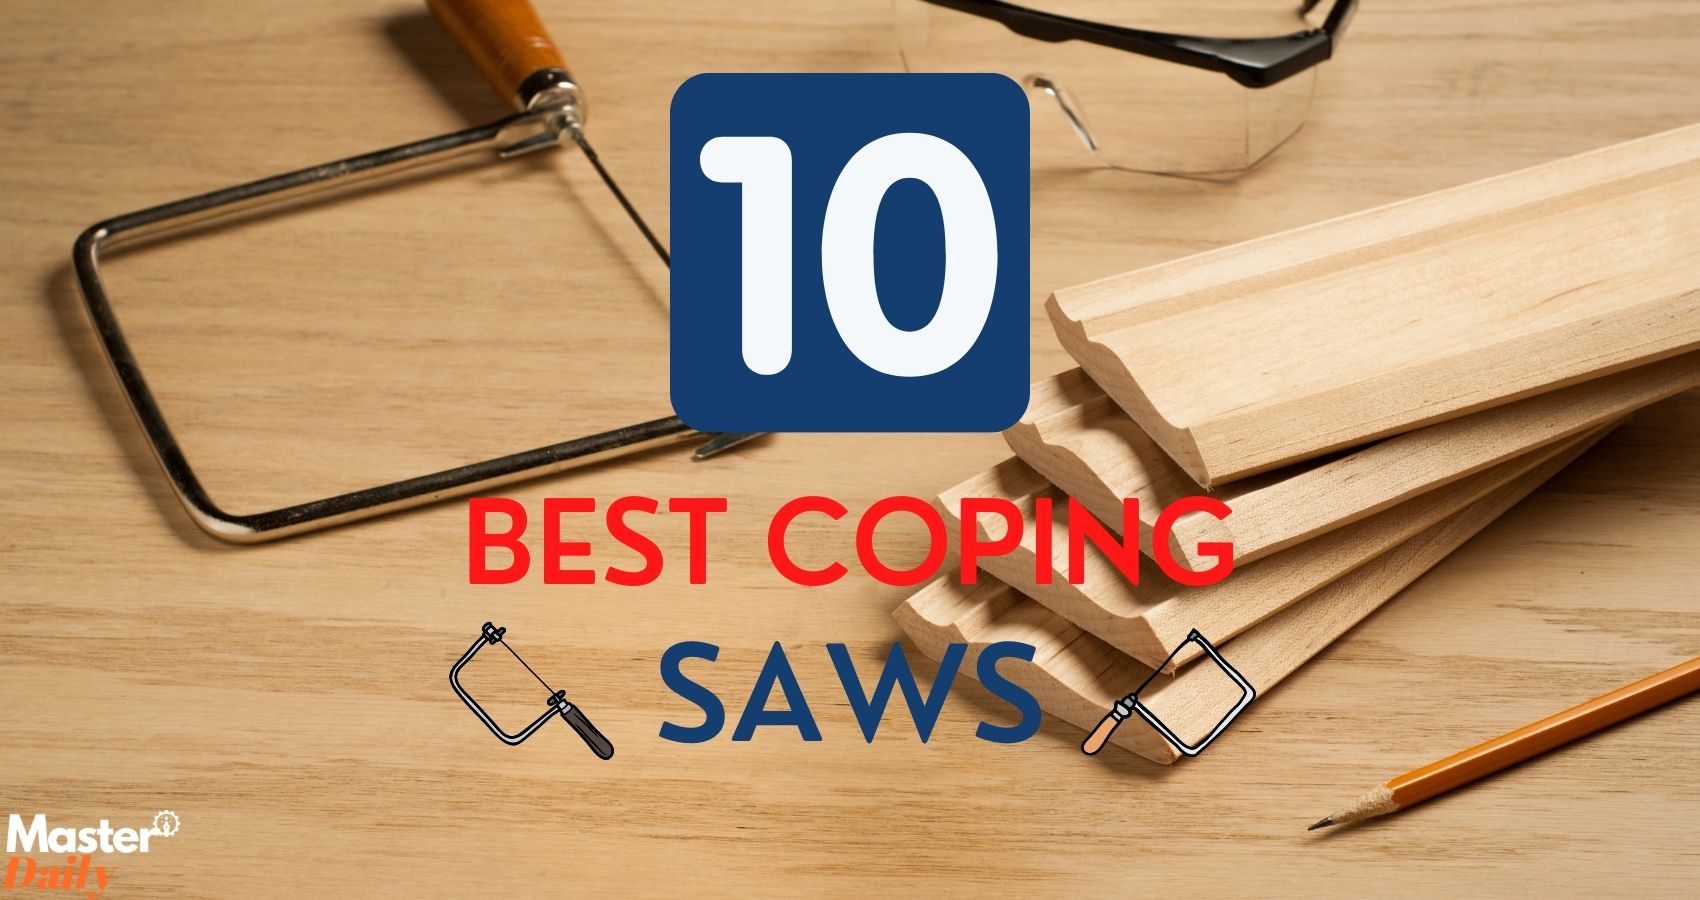 Best Coping Saws